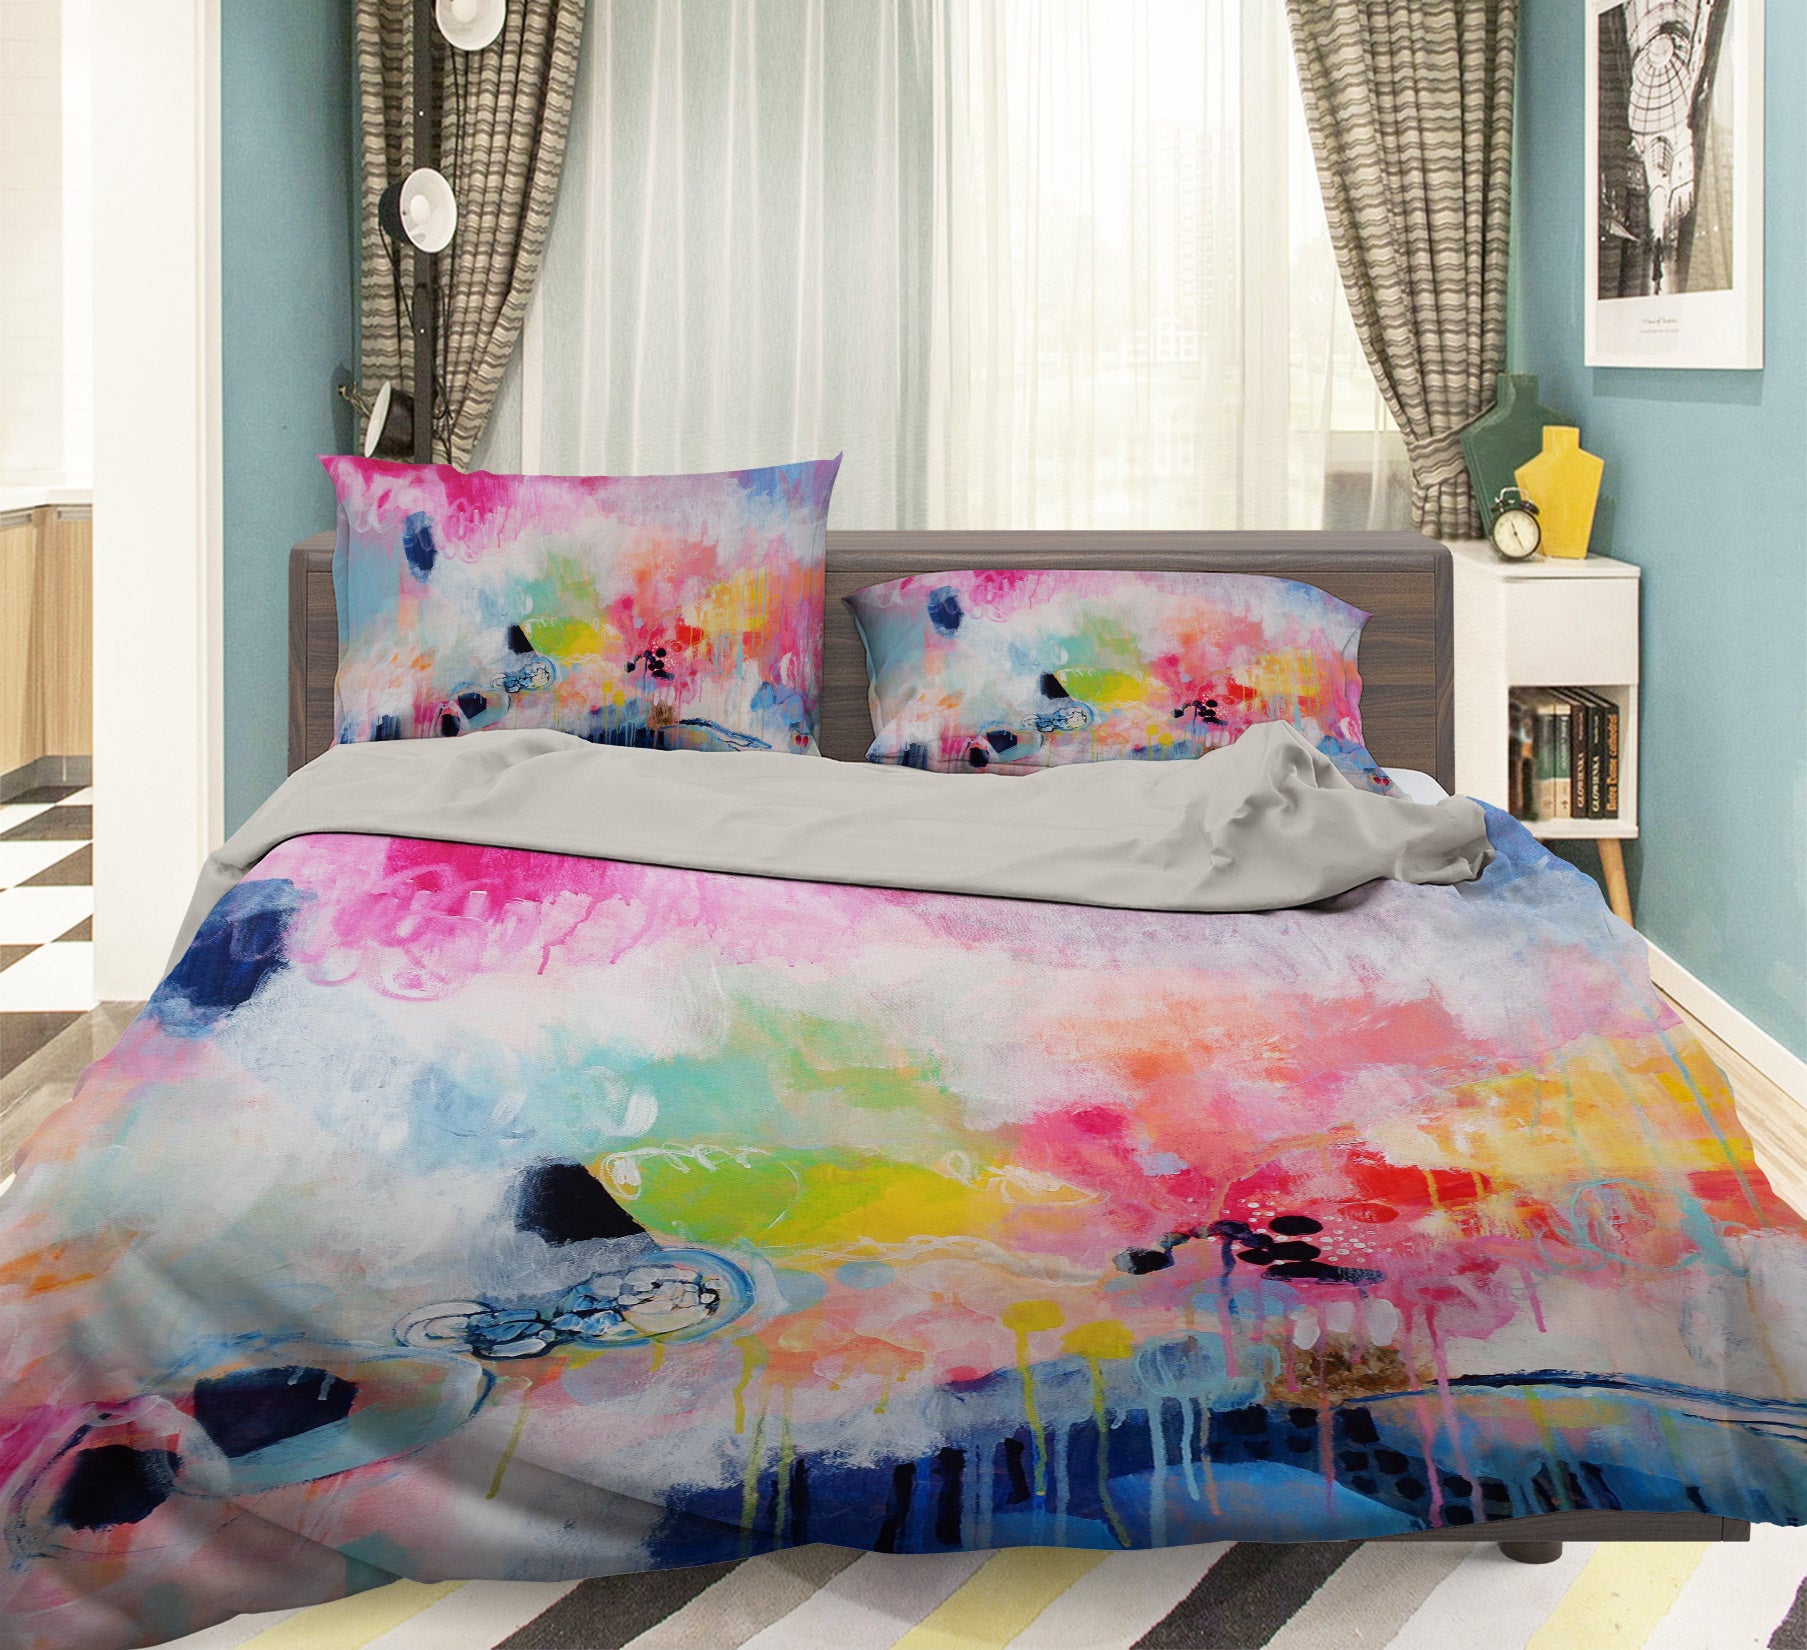 3D Color Painting 1202 Misako Chida Bedding Bed Pillowcases Quilt Cover Duvet Cover